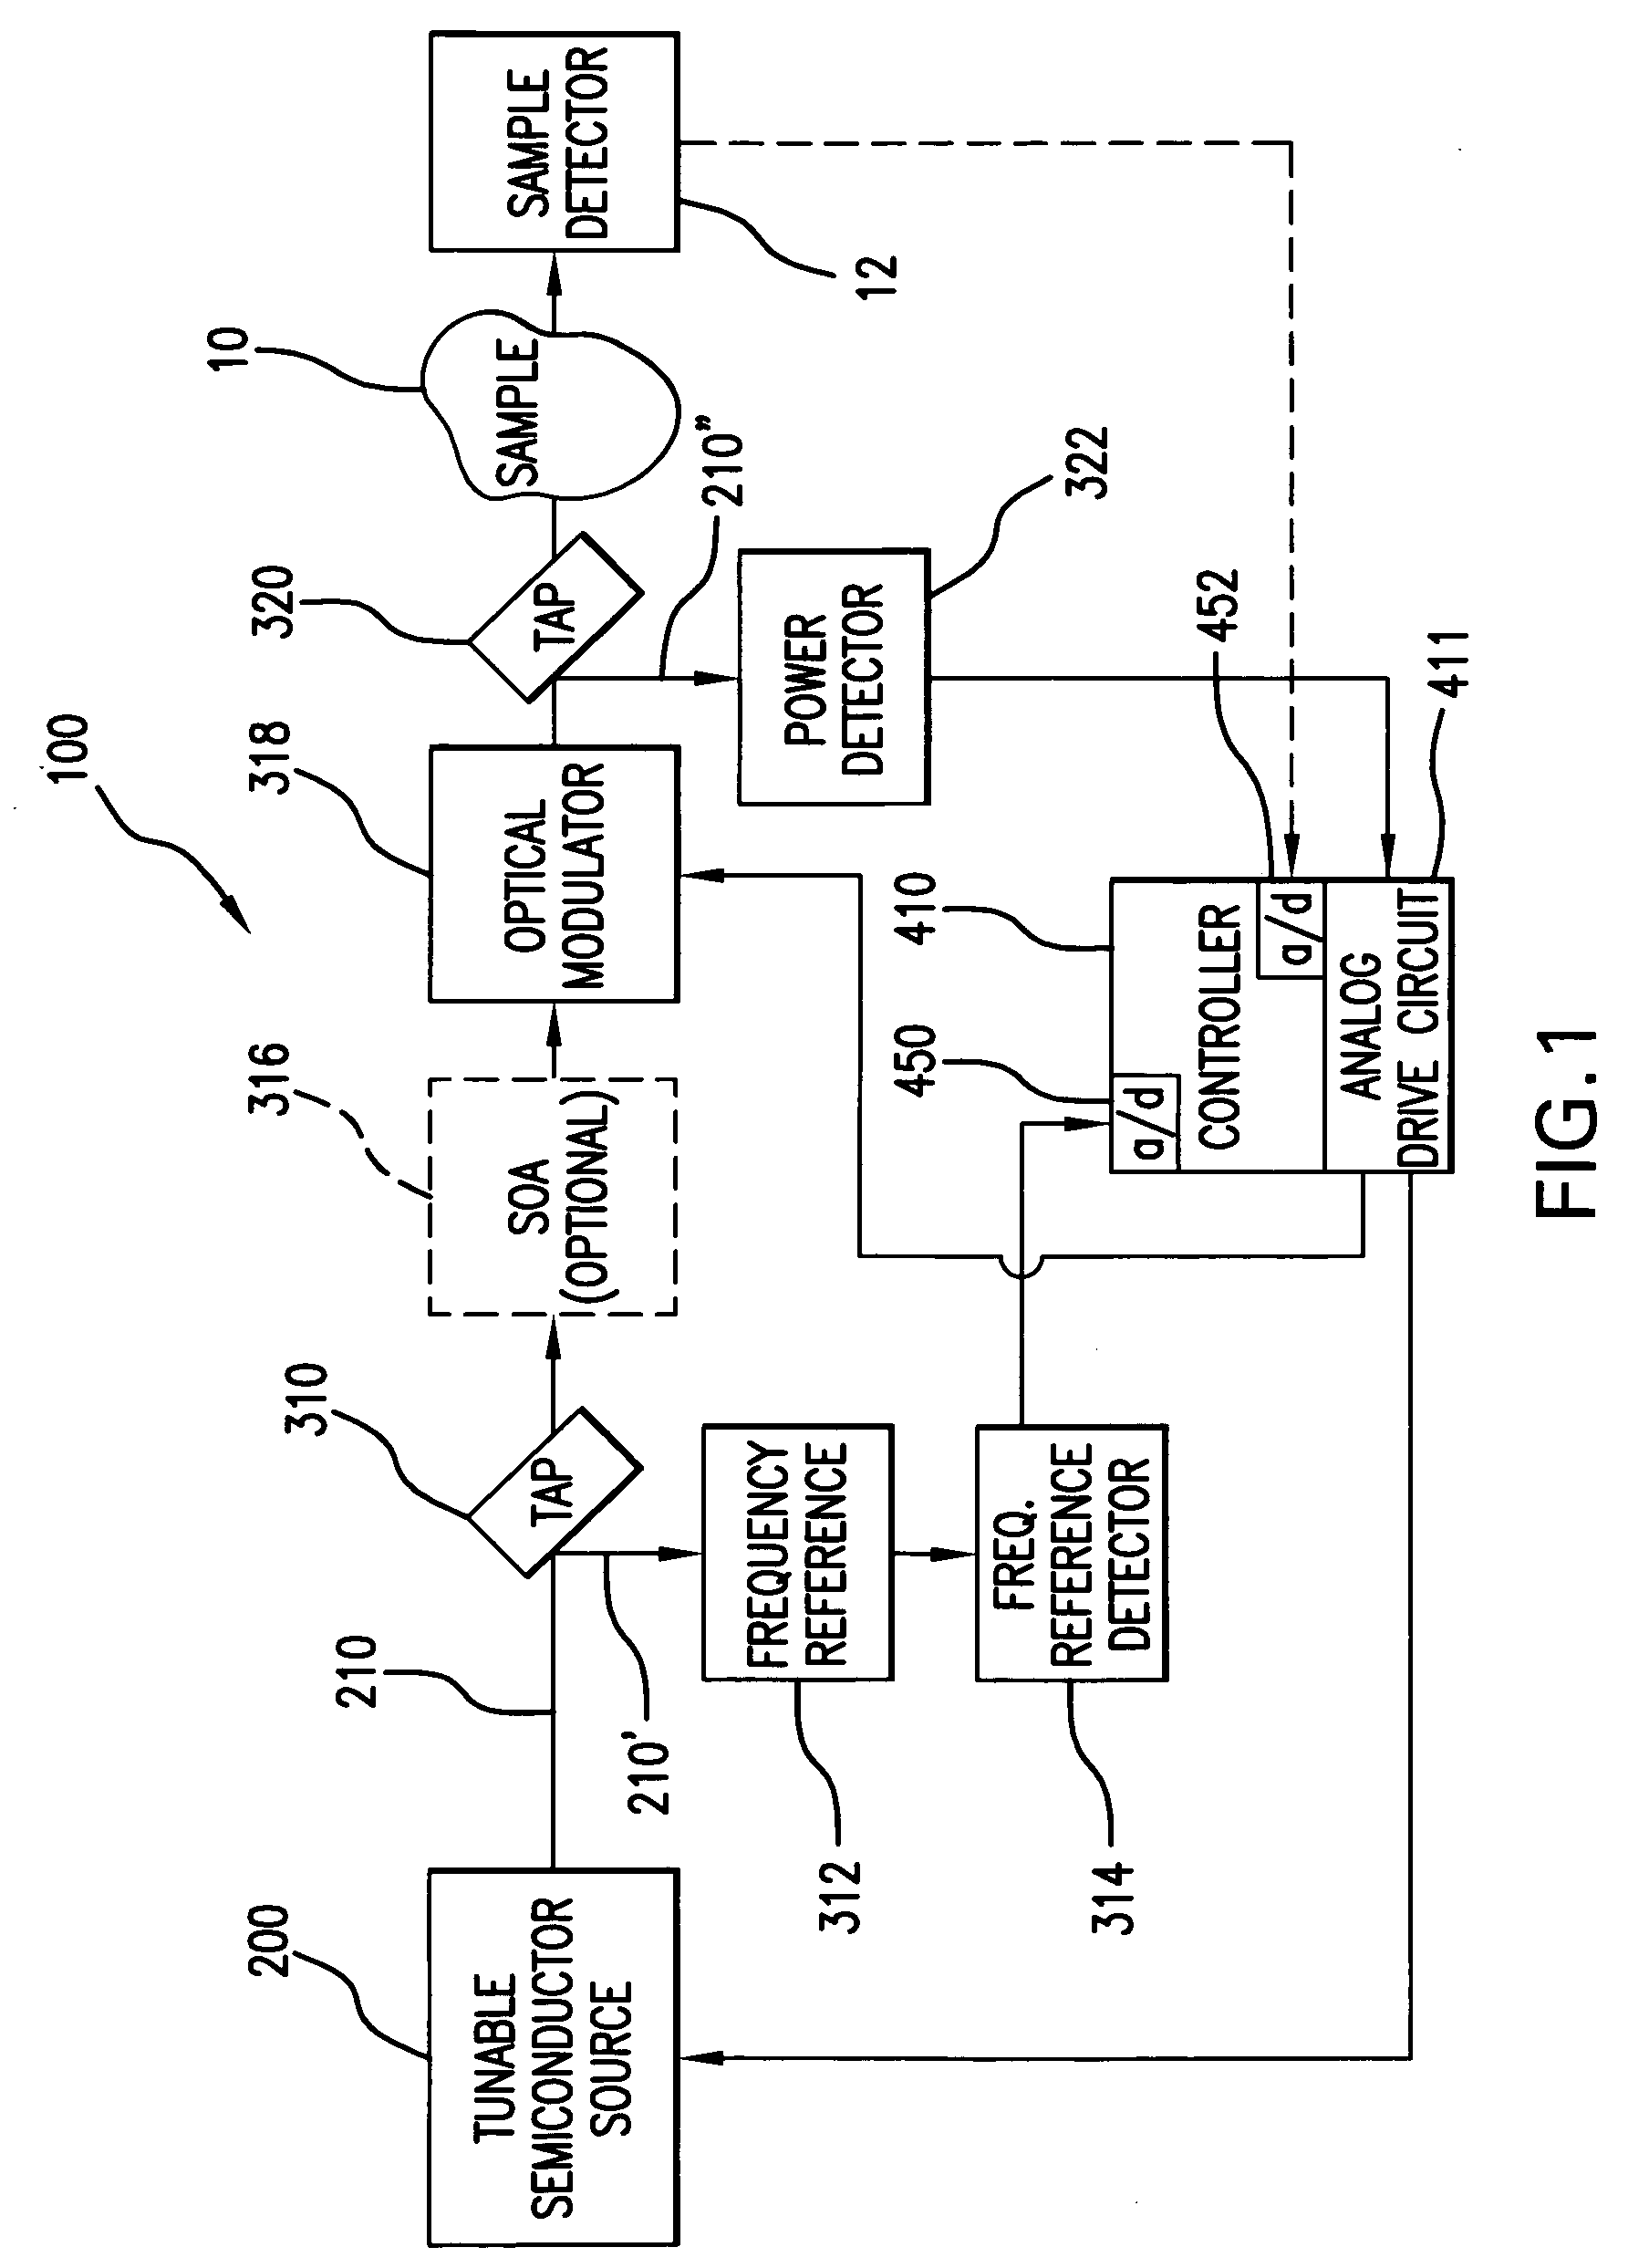 Semiconductor laser with tilted fabry-perot tunable filter